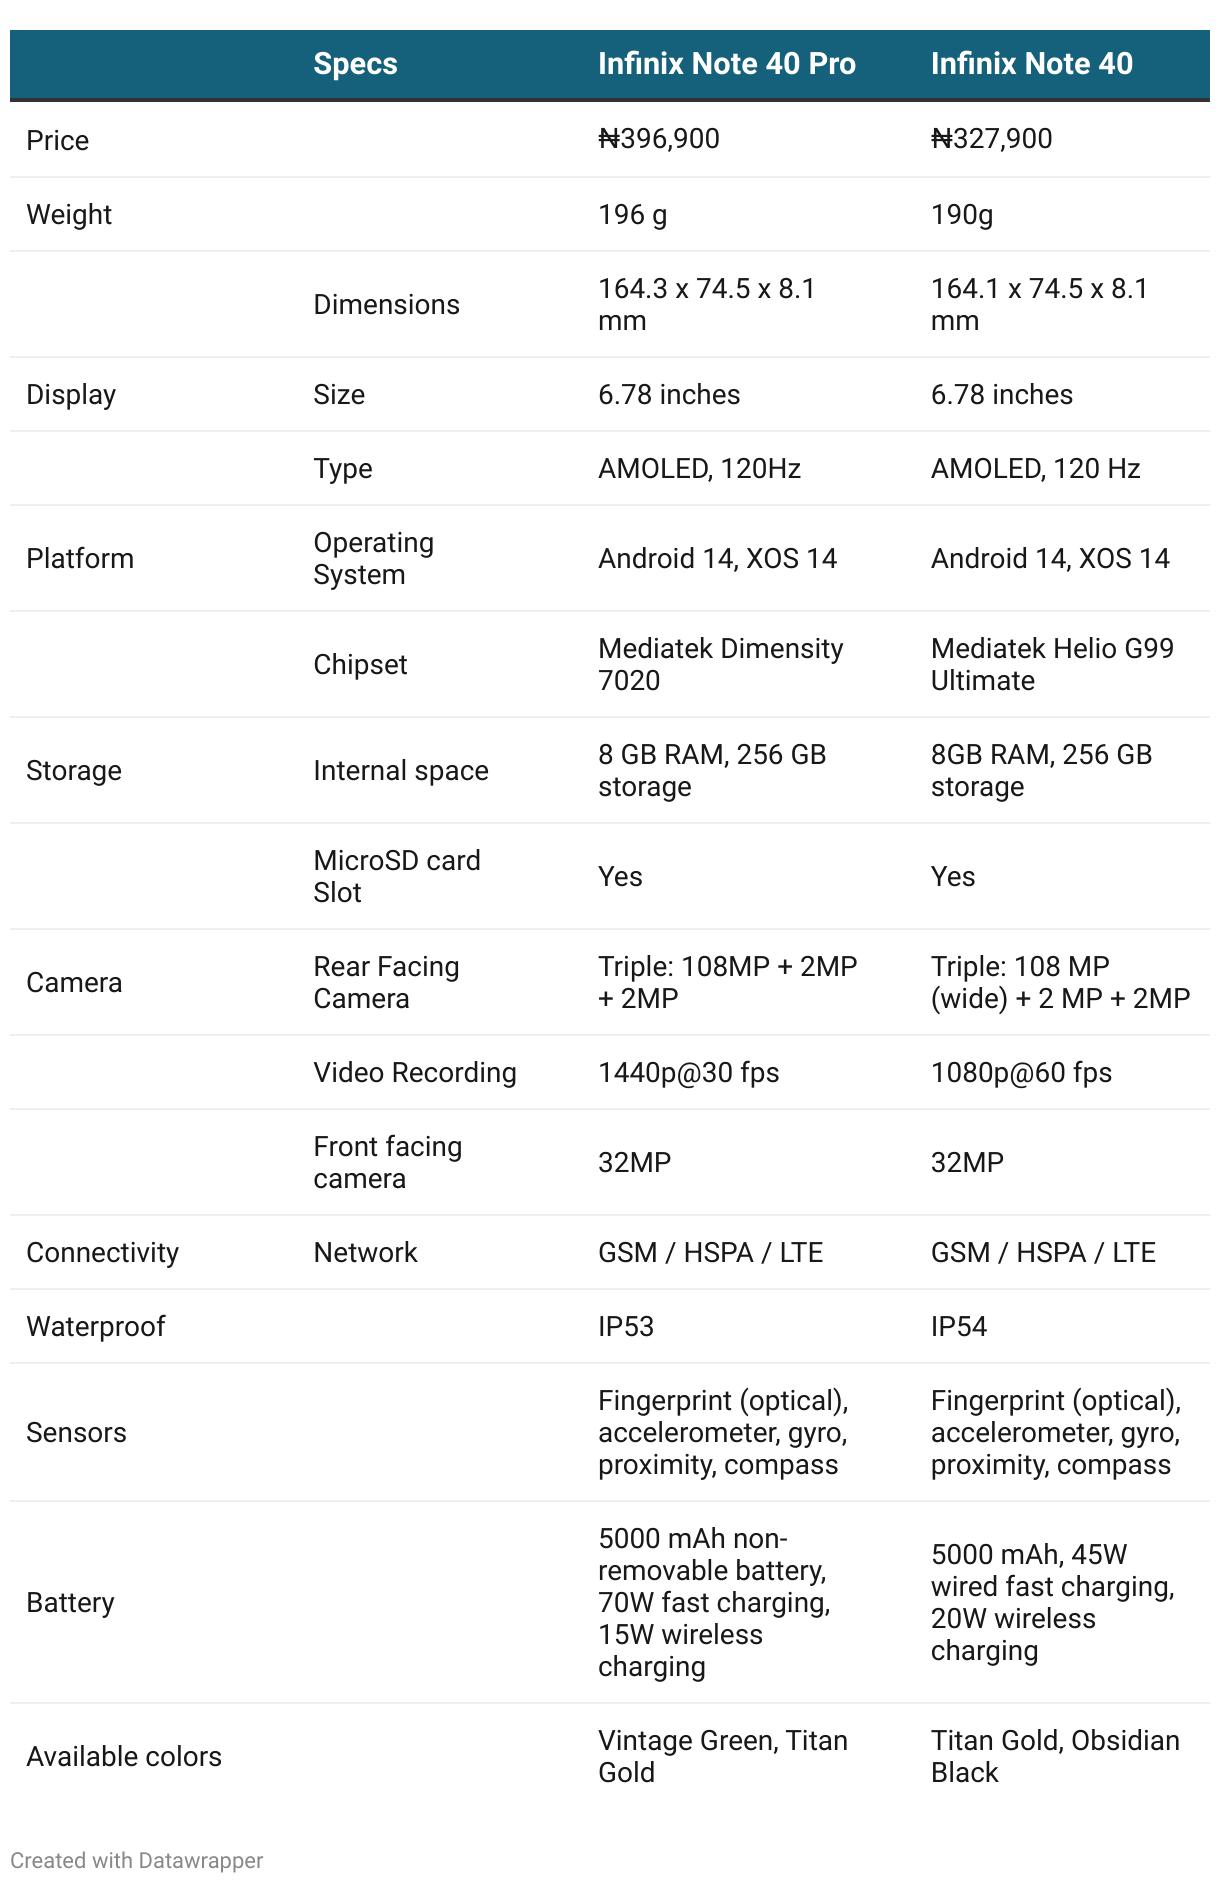 Specs Table for the Infinix Note 40 and Note 40 Pro phones.